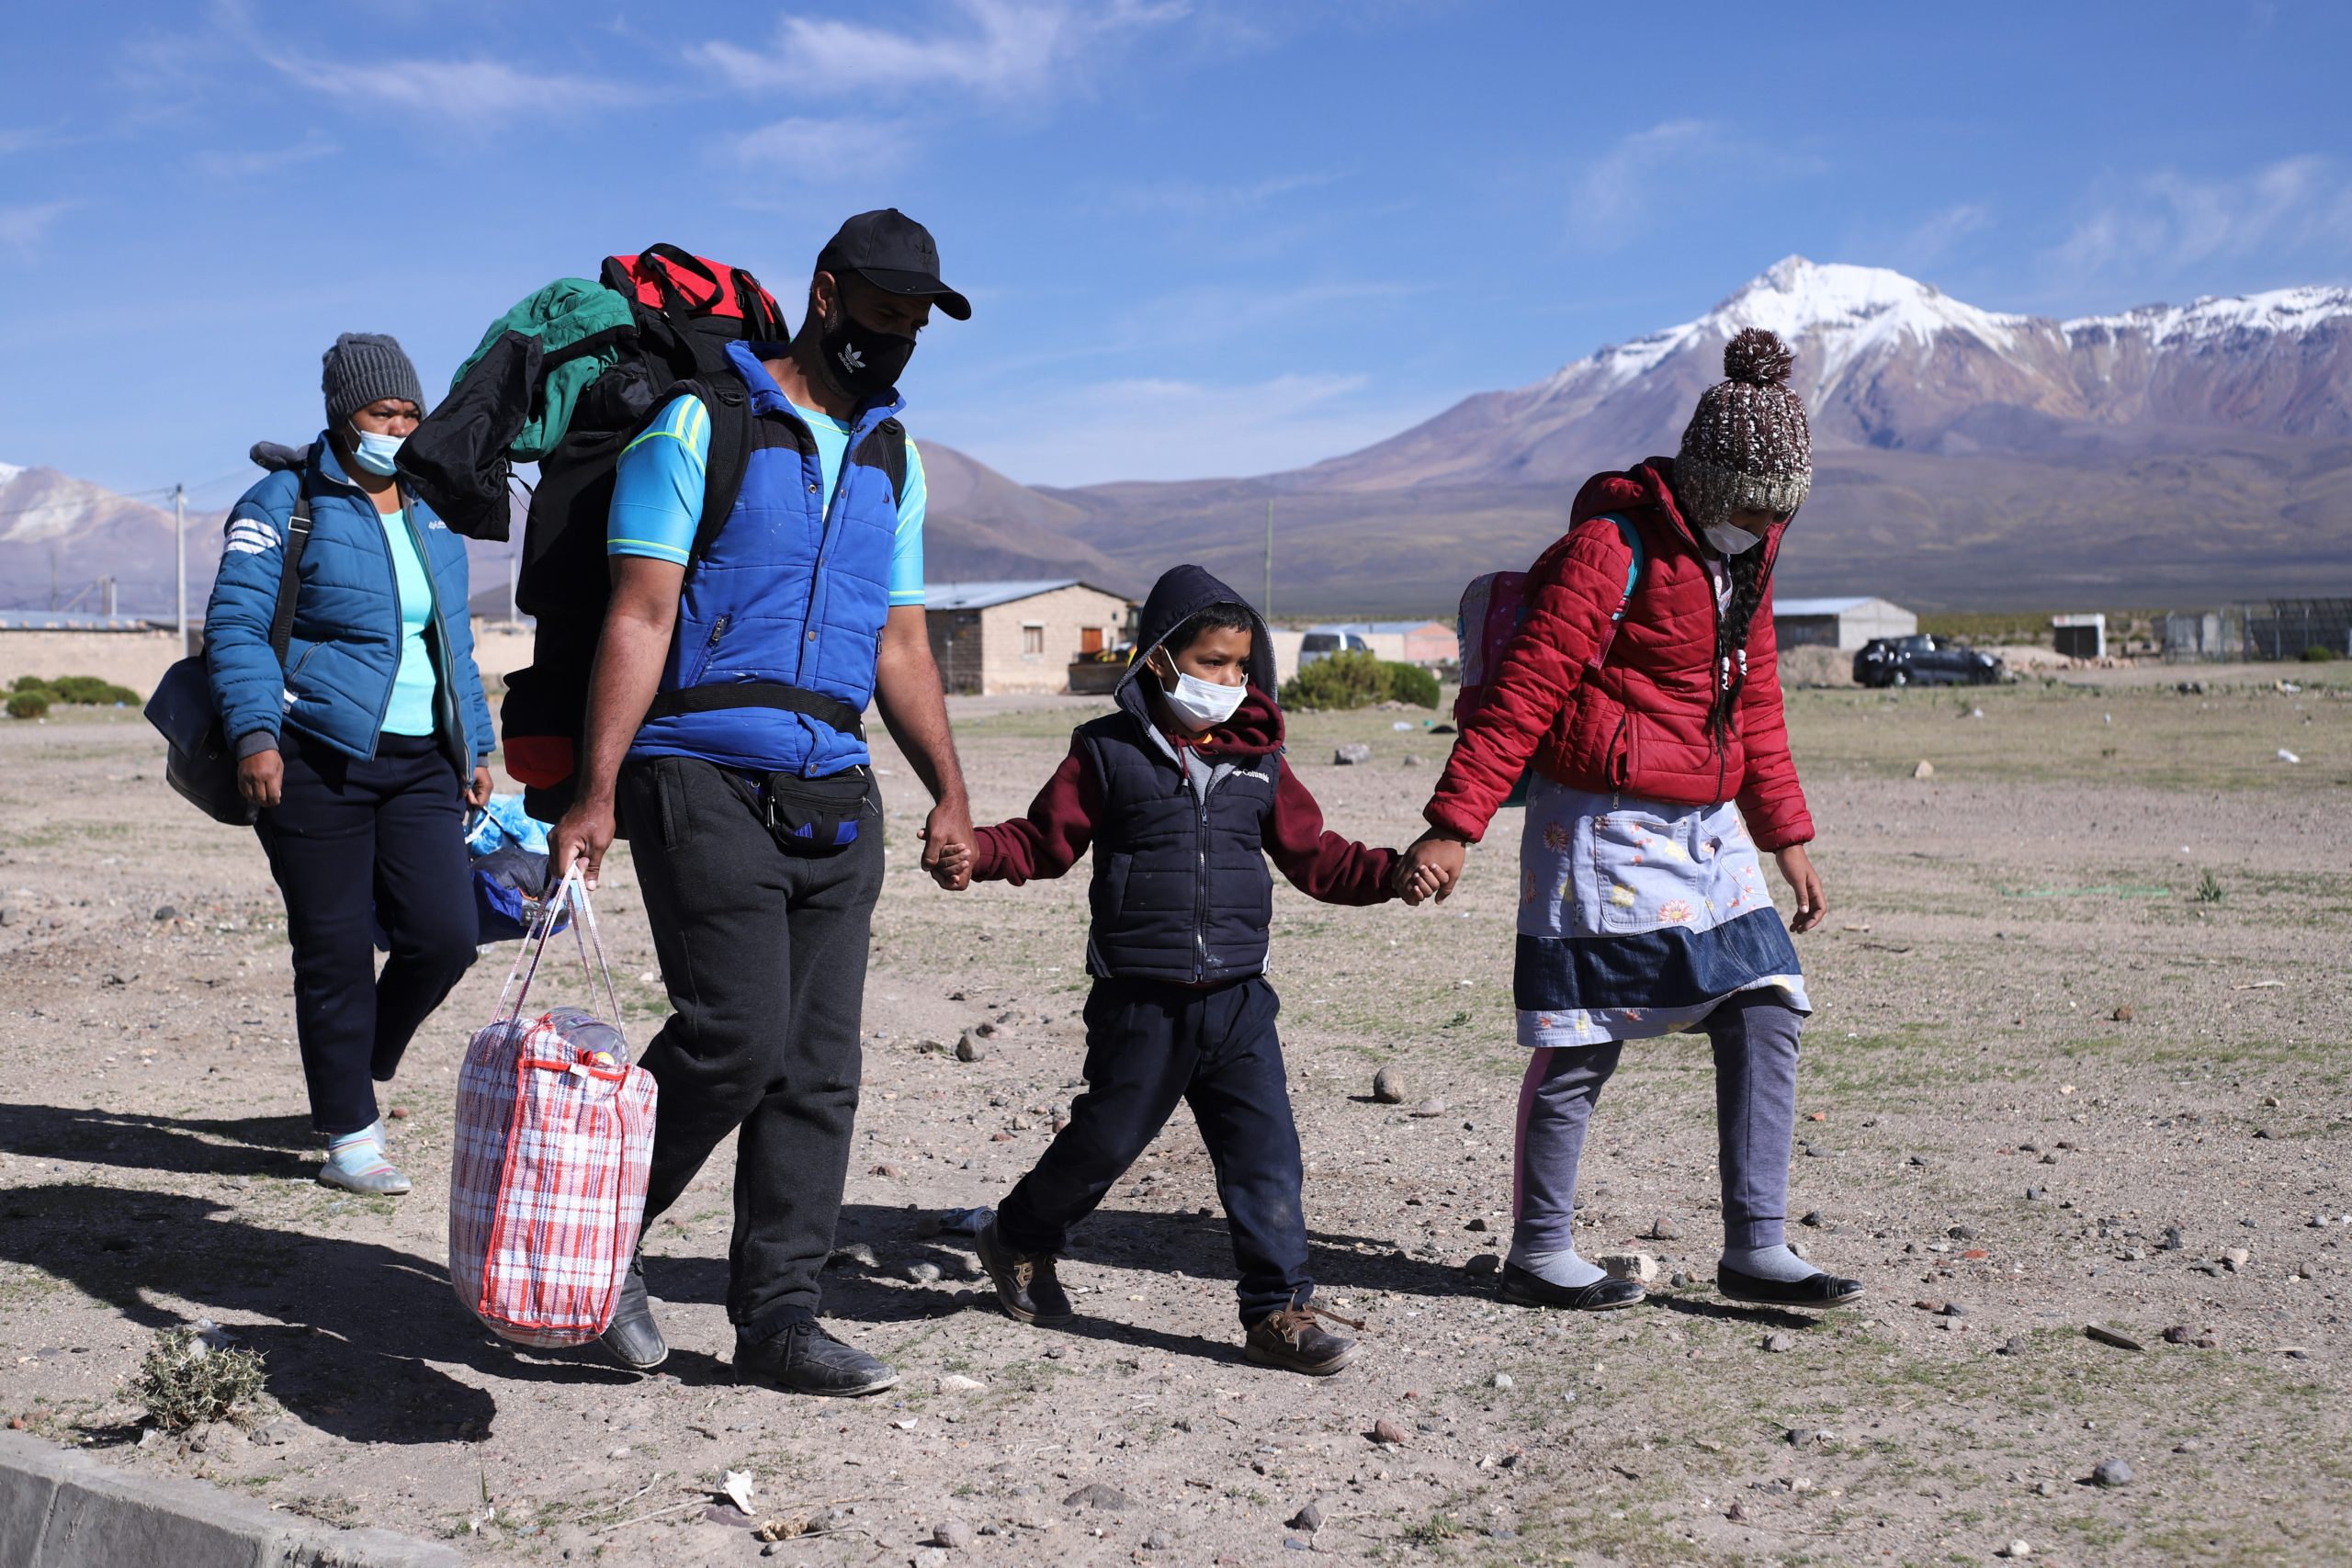 The road to the American dream requires crossing the border illegally, in the middle of the altiplano, at more than 4,000 meters above sea level, with temperatures below zero once the sun goes down. Such extreme conditions to reach Chile have caused 23 deaths since the beginning of the migration crisis in February 2021.